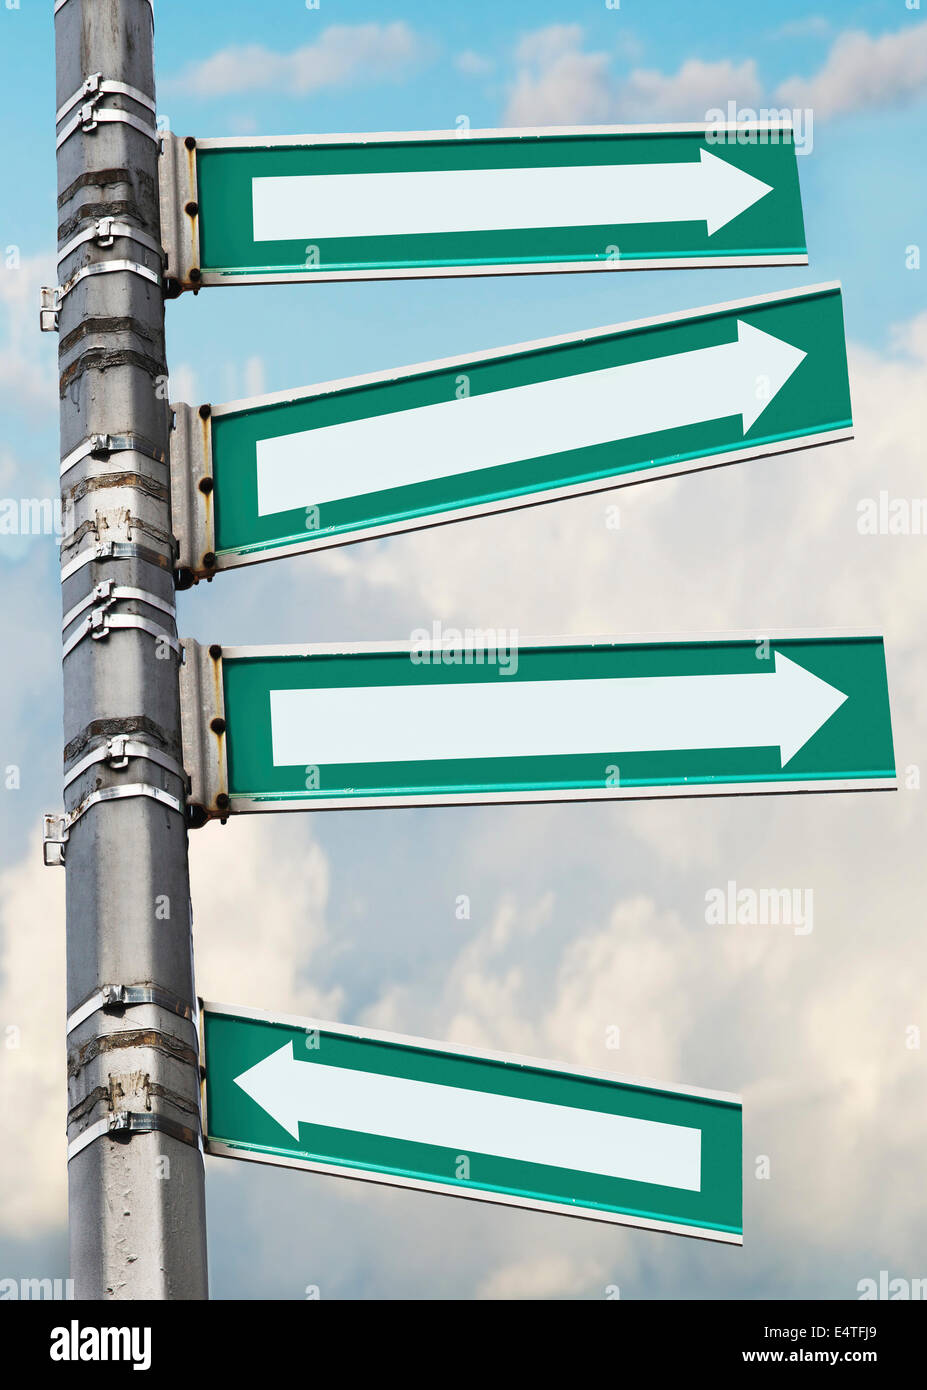 Arrow signs on a pole, showing different directions against sky Stock Photo